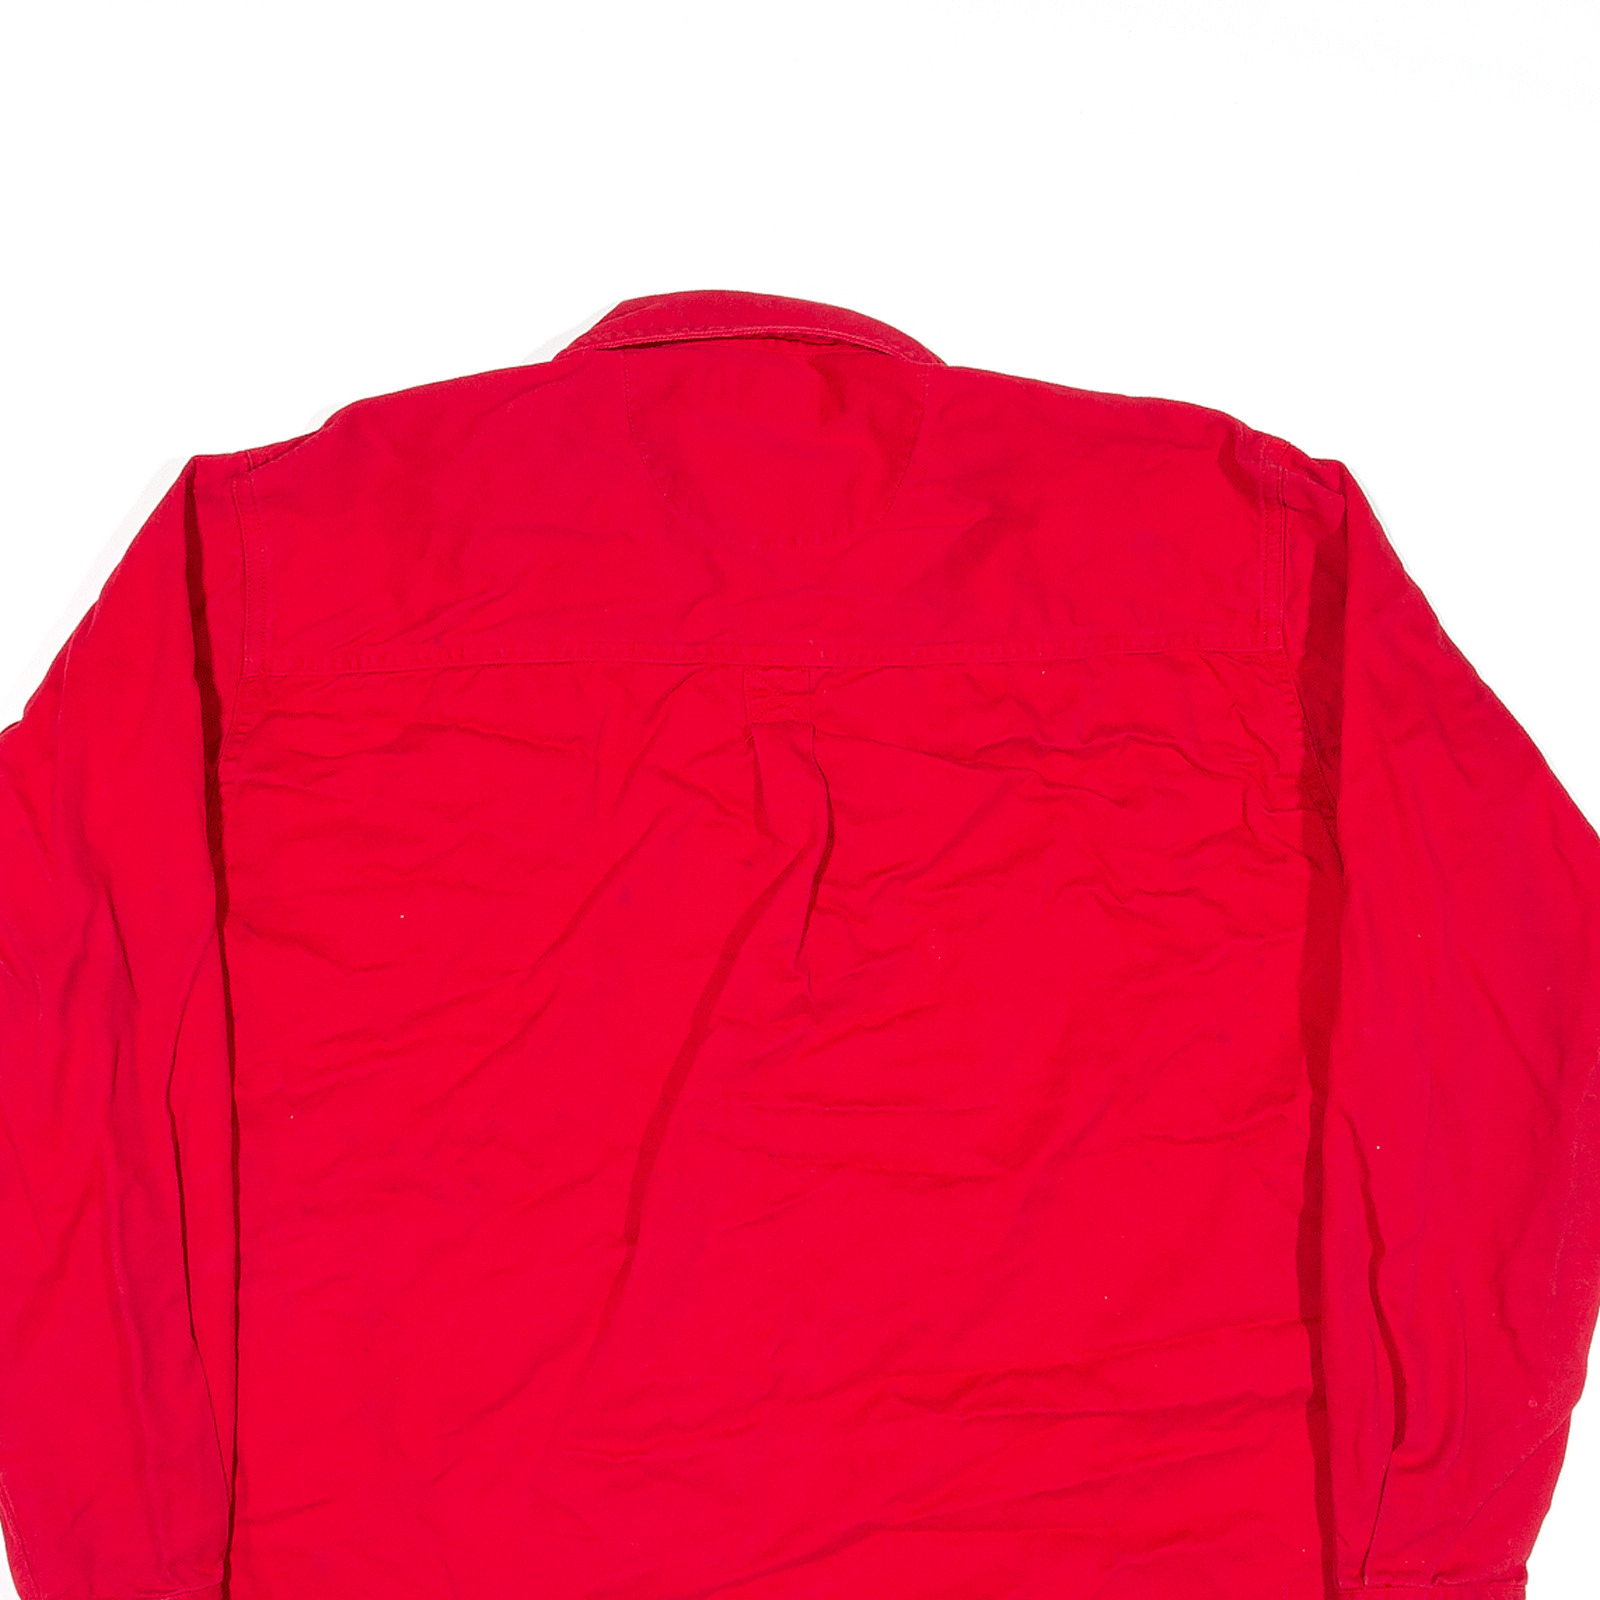 MOUNTAIN LAND Mens Plain Shirt Red Long Sleeve S - Picture 4 of 6